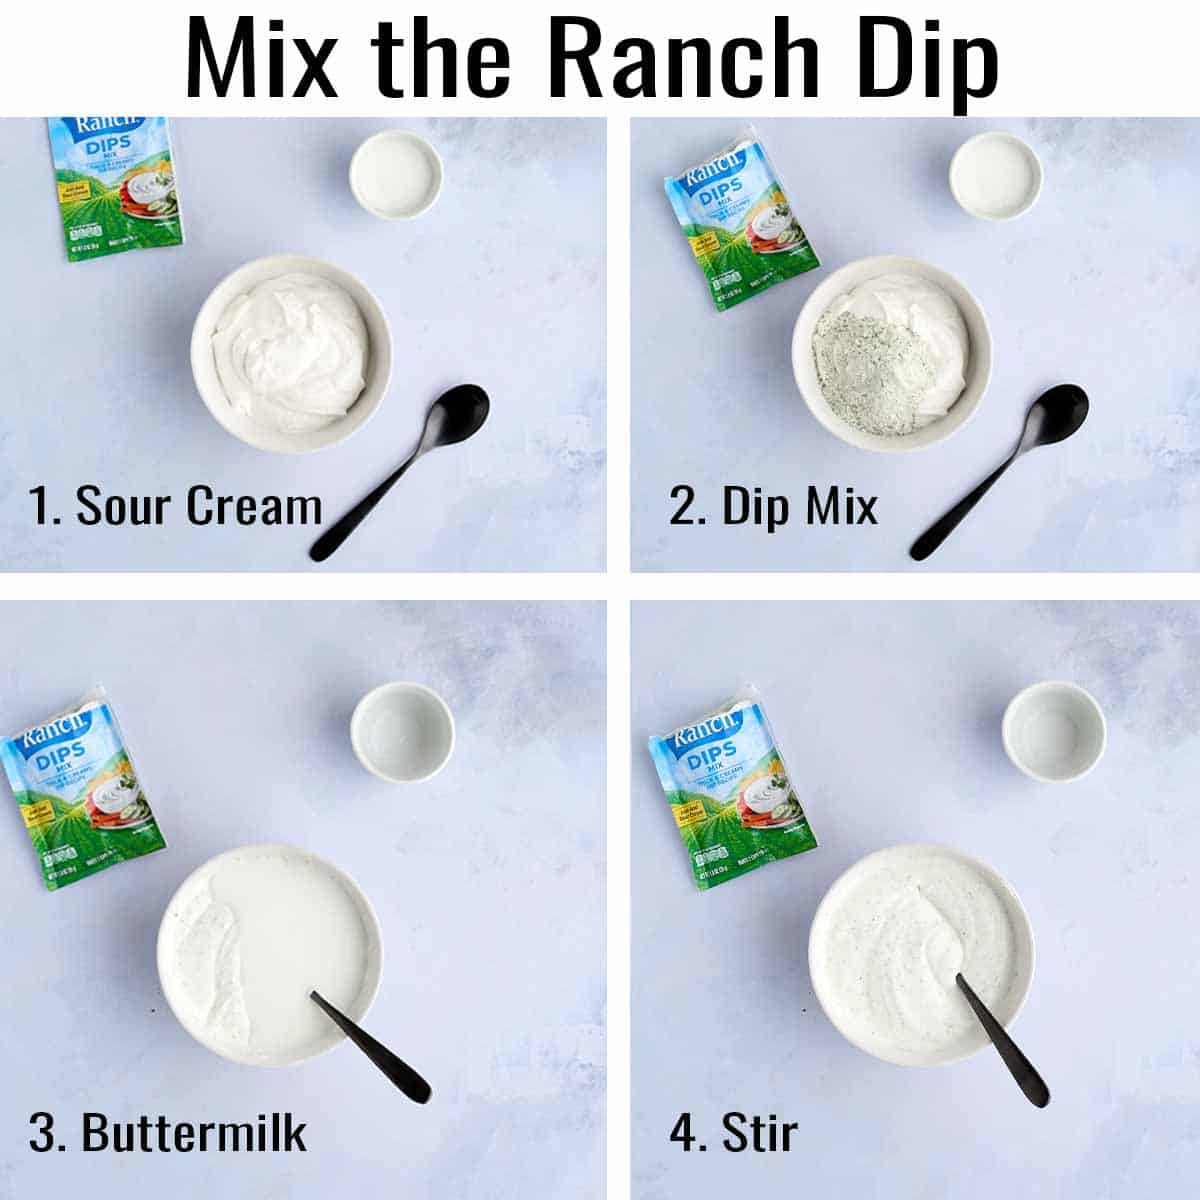 Step-by-step photos showing how to make Ranch dip dressing. Bowl of sour cream. Then dry dip mix poured into the bowl. Then buttermilk added. Then the final product stirred together.